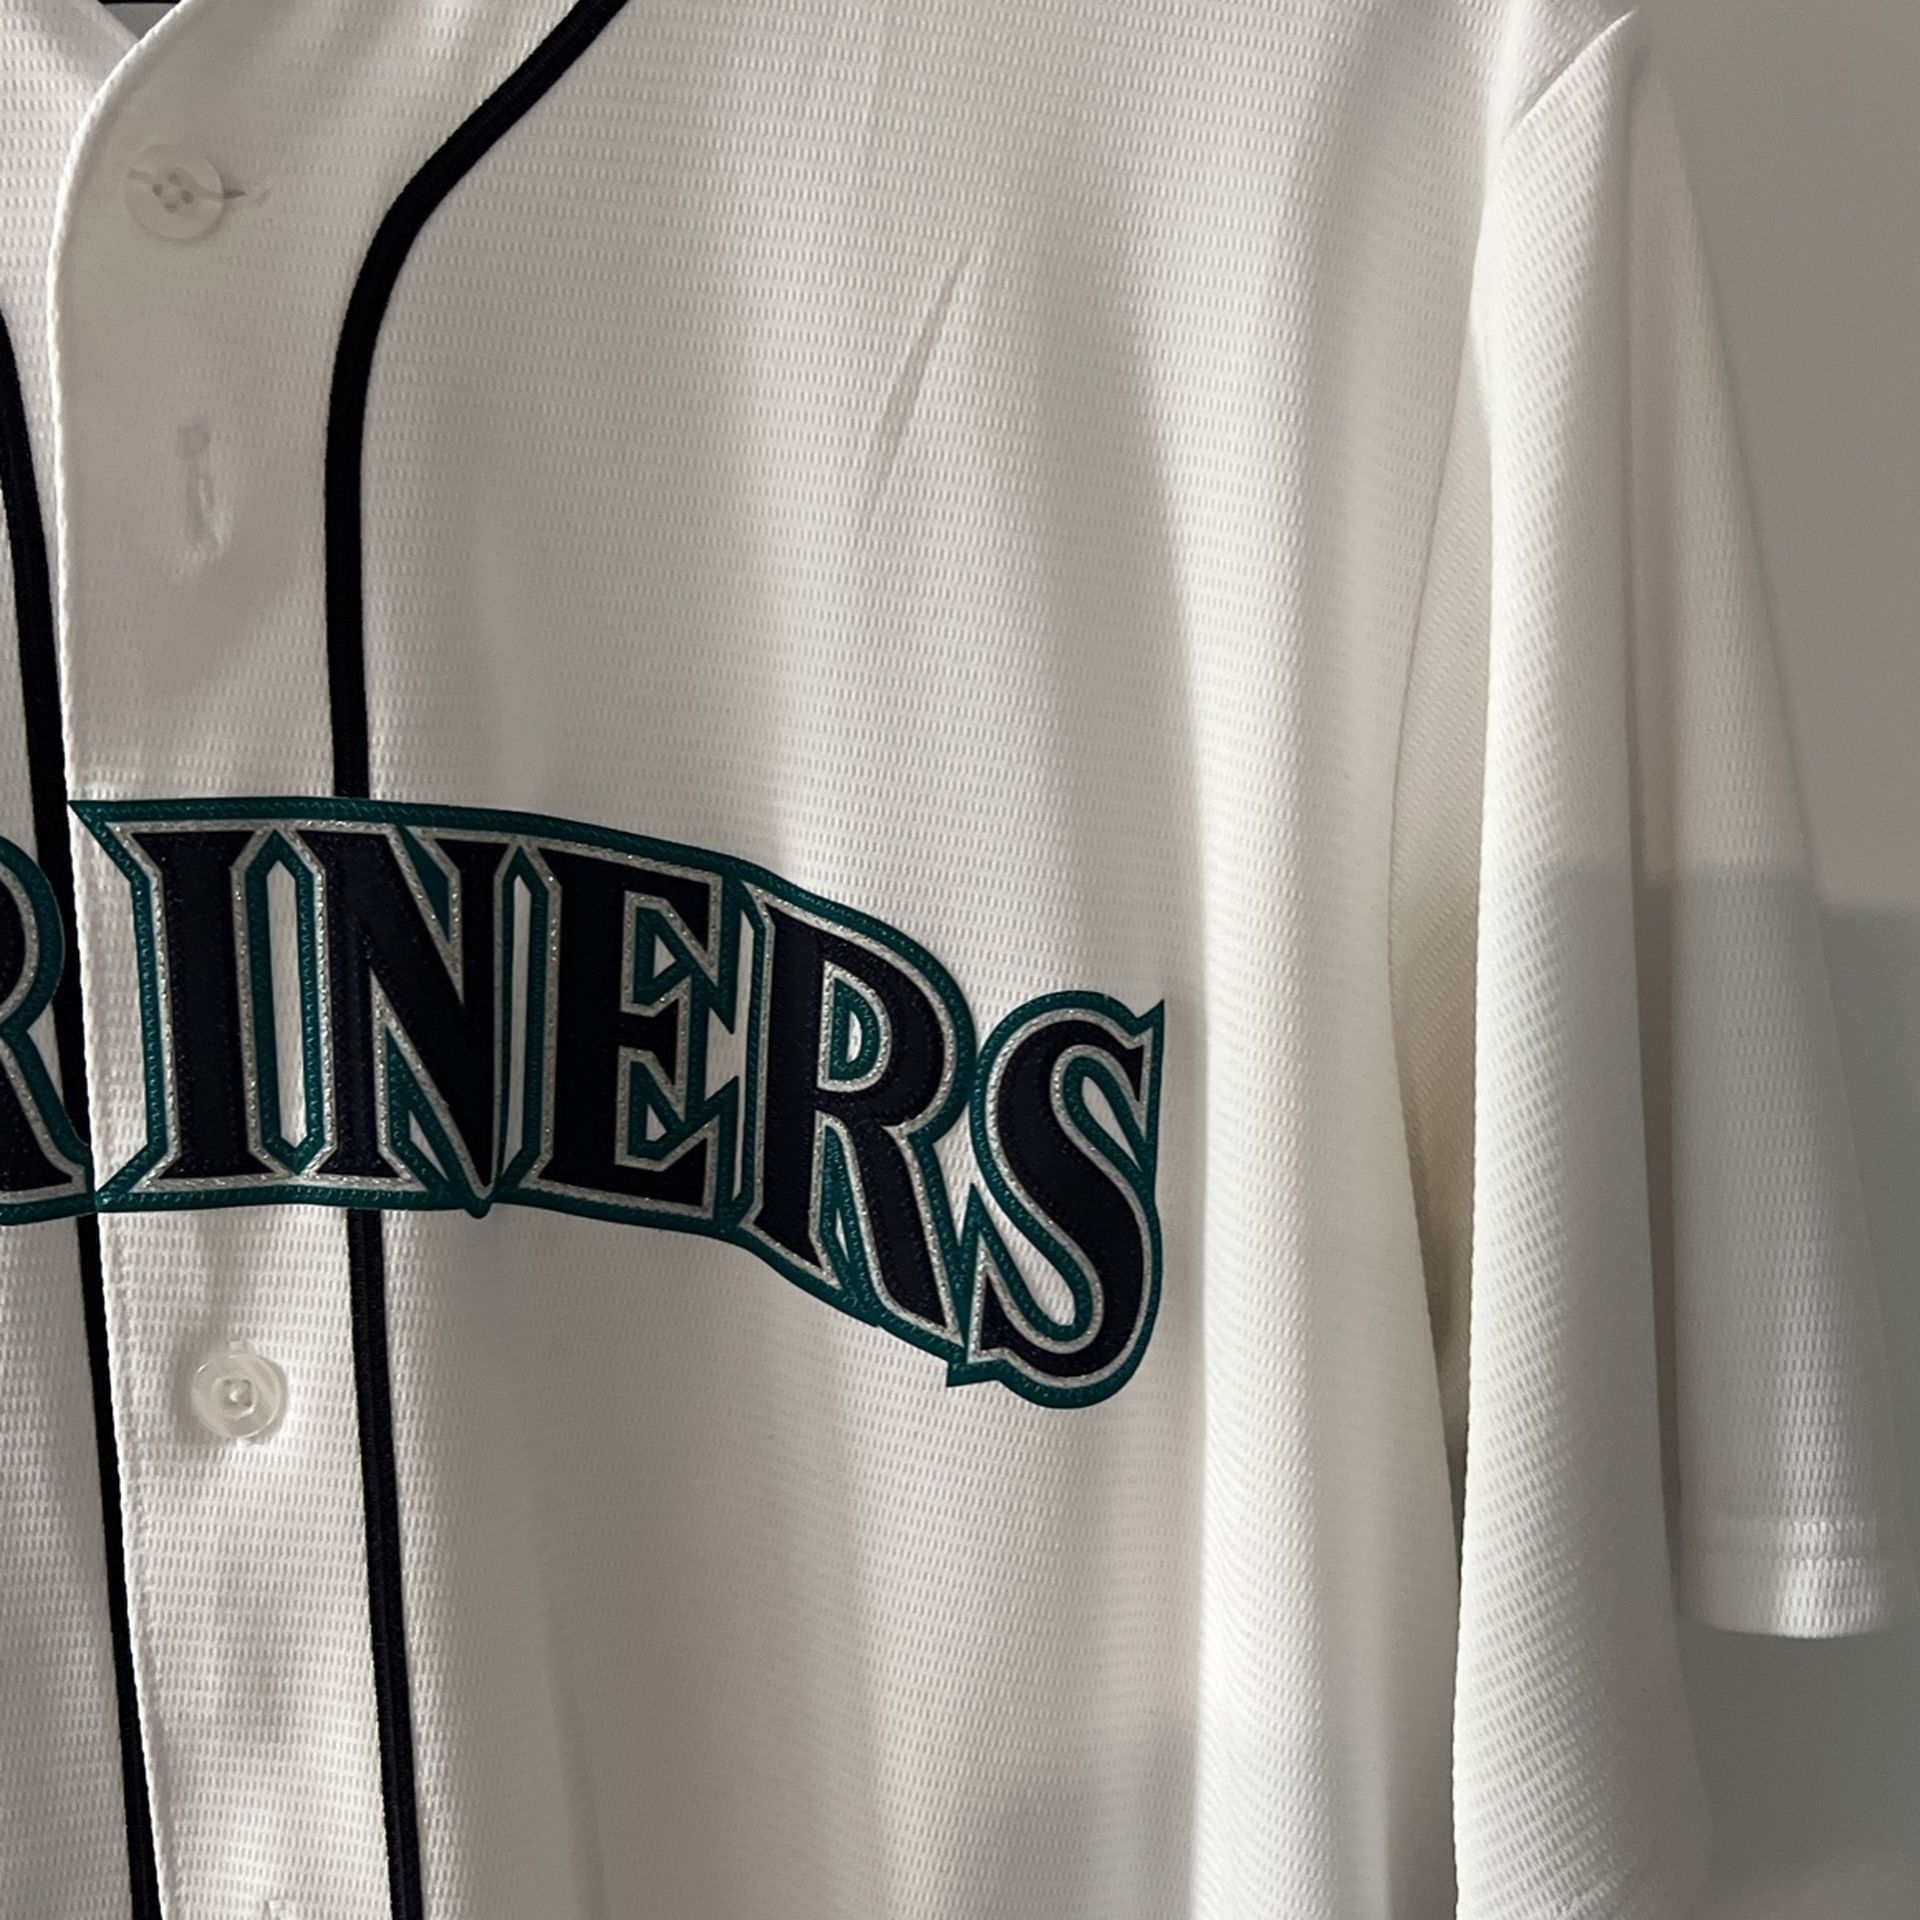 Mariners Jersey Authenic $25 for Sale in Kent, WA - OfferUp